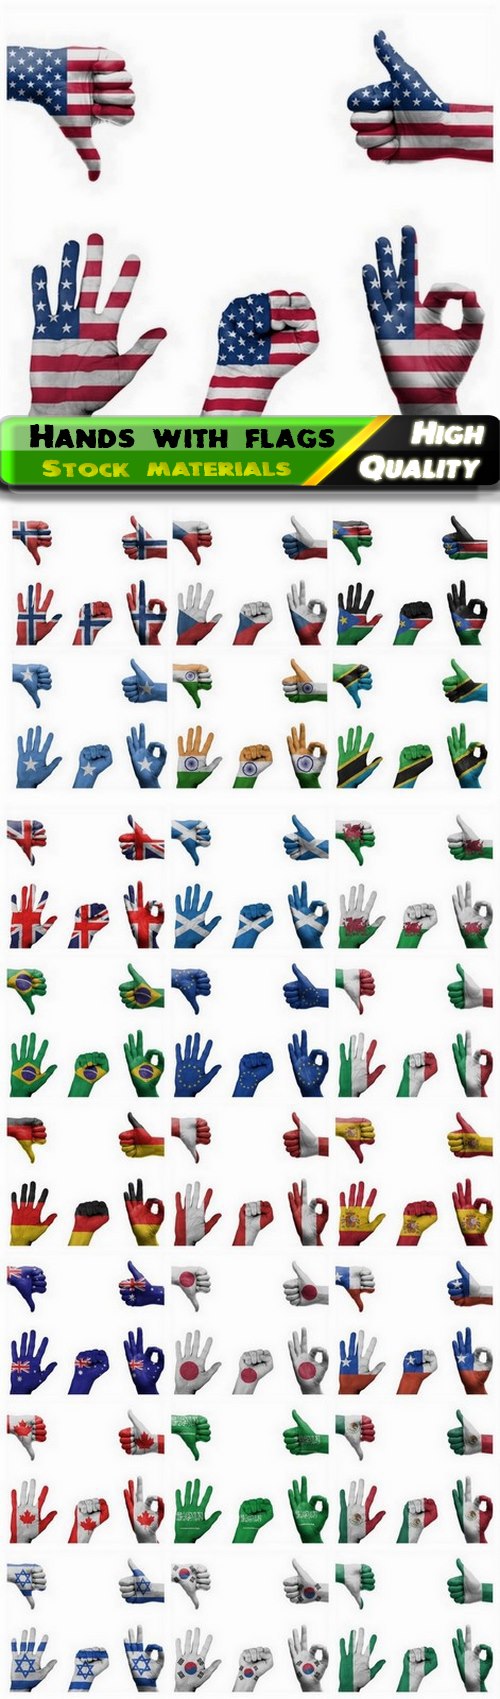 Human hands with different country flags - 25 HQ Jpg